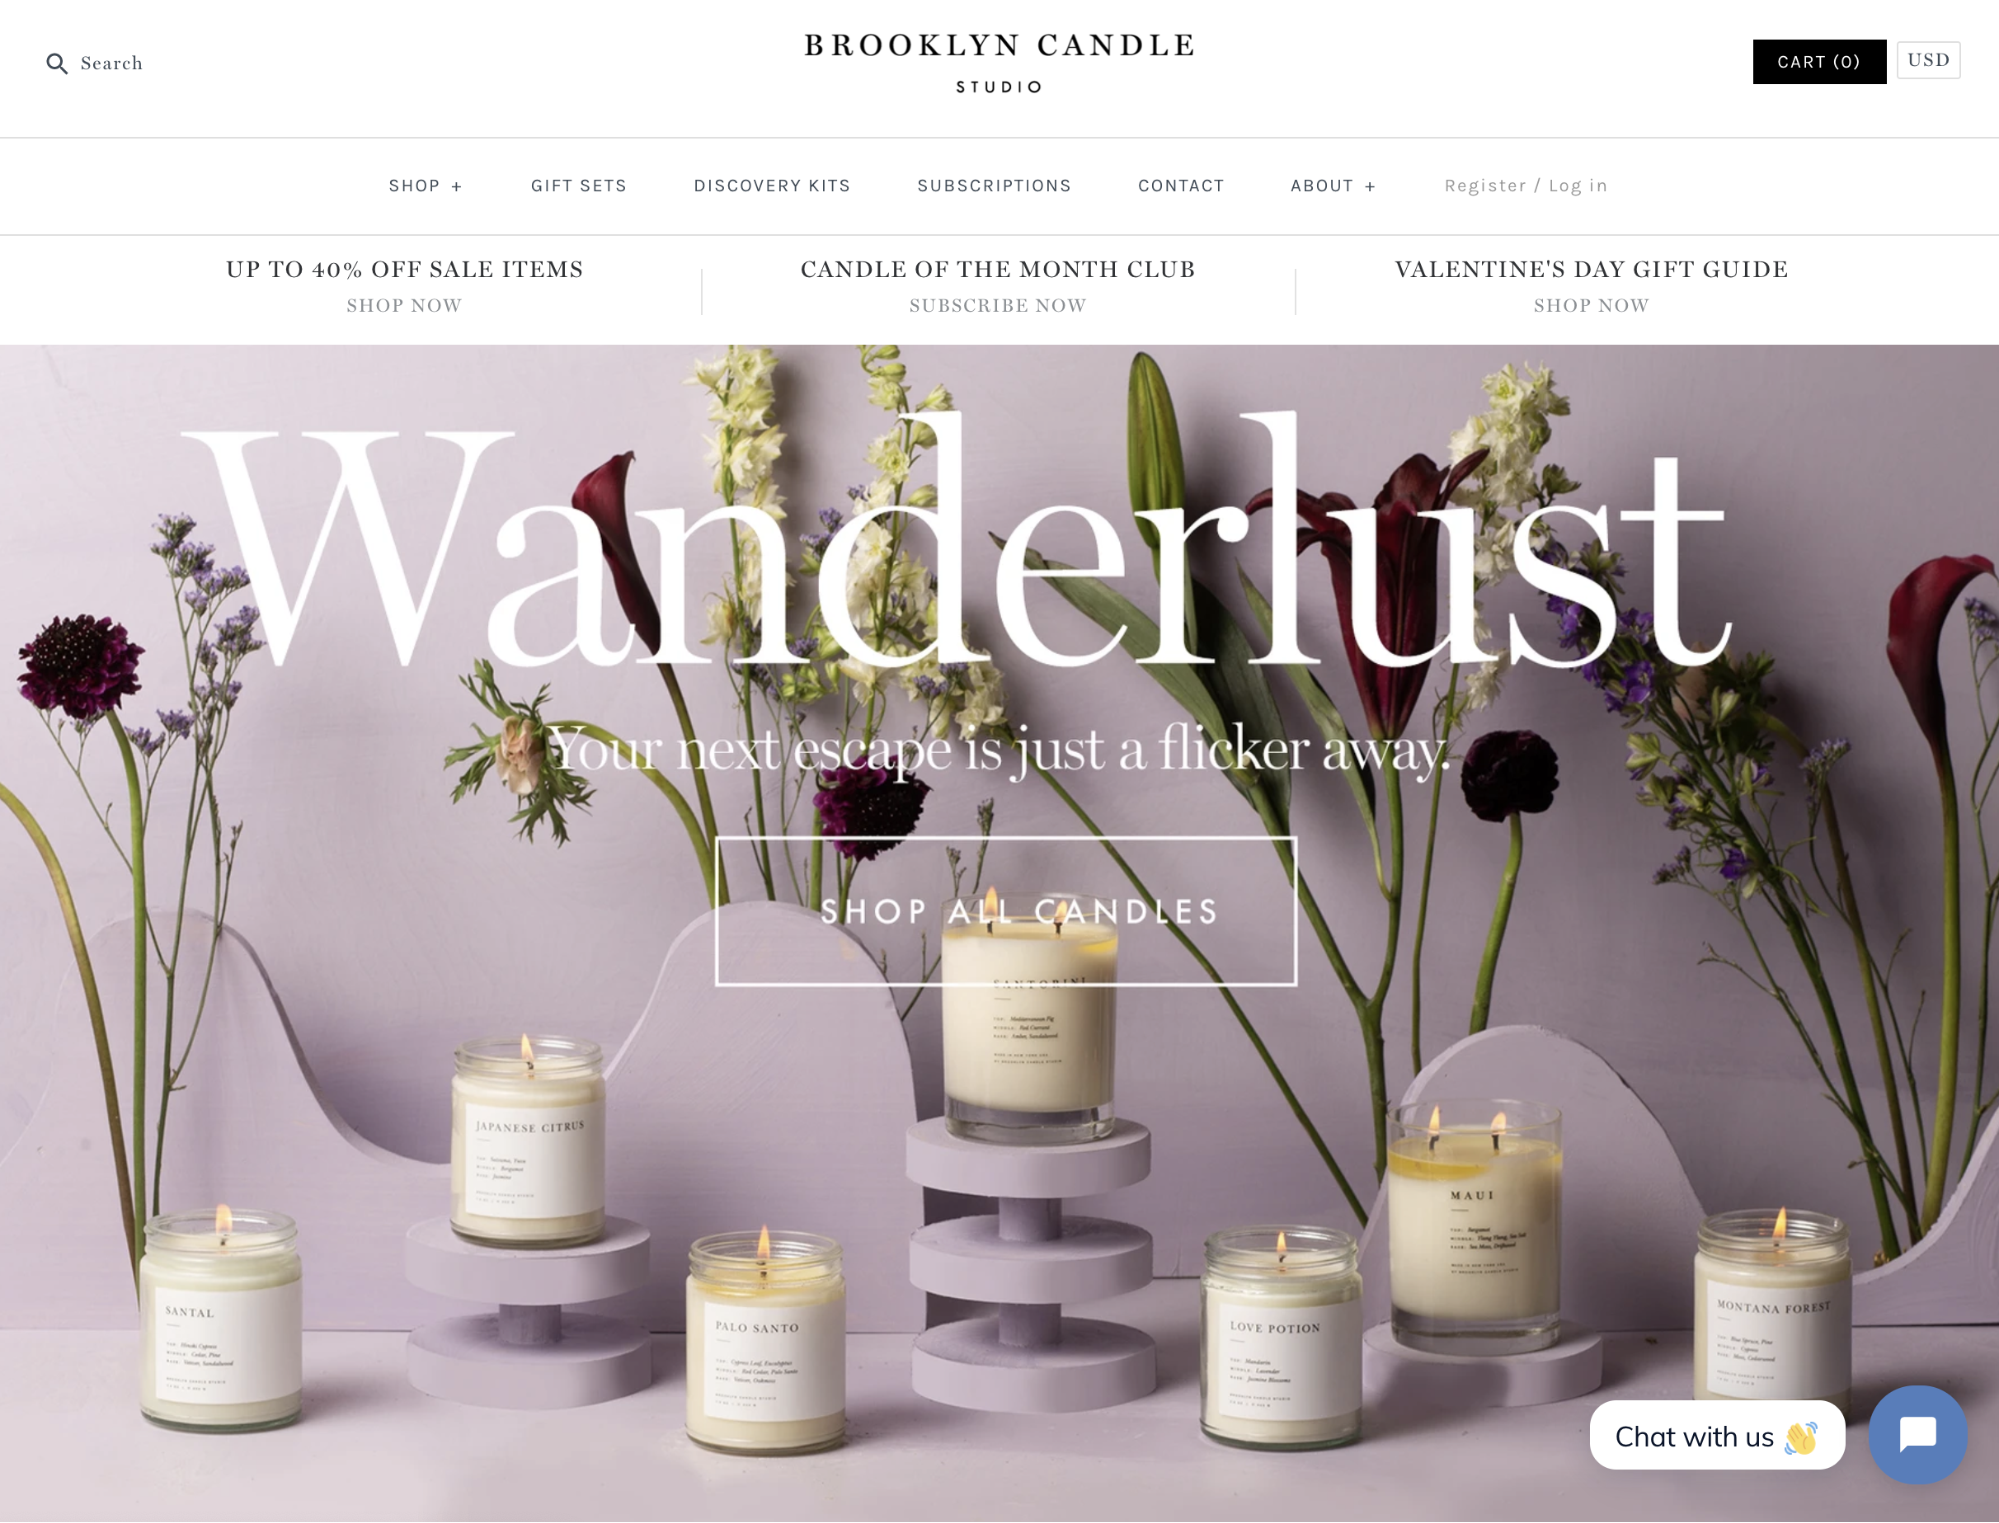 Brooklyn candle studio homepage: “wanderlust,” various candles and flowers arranged together